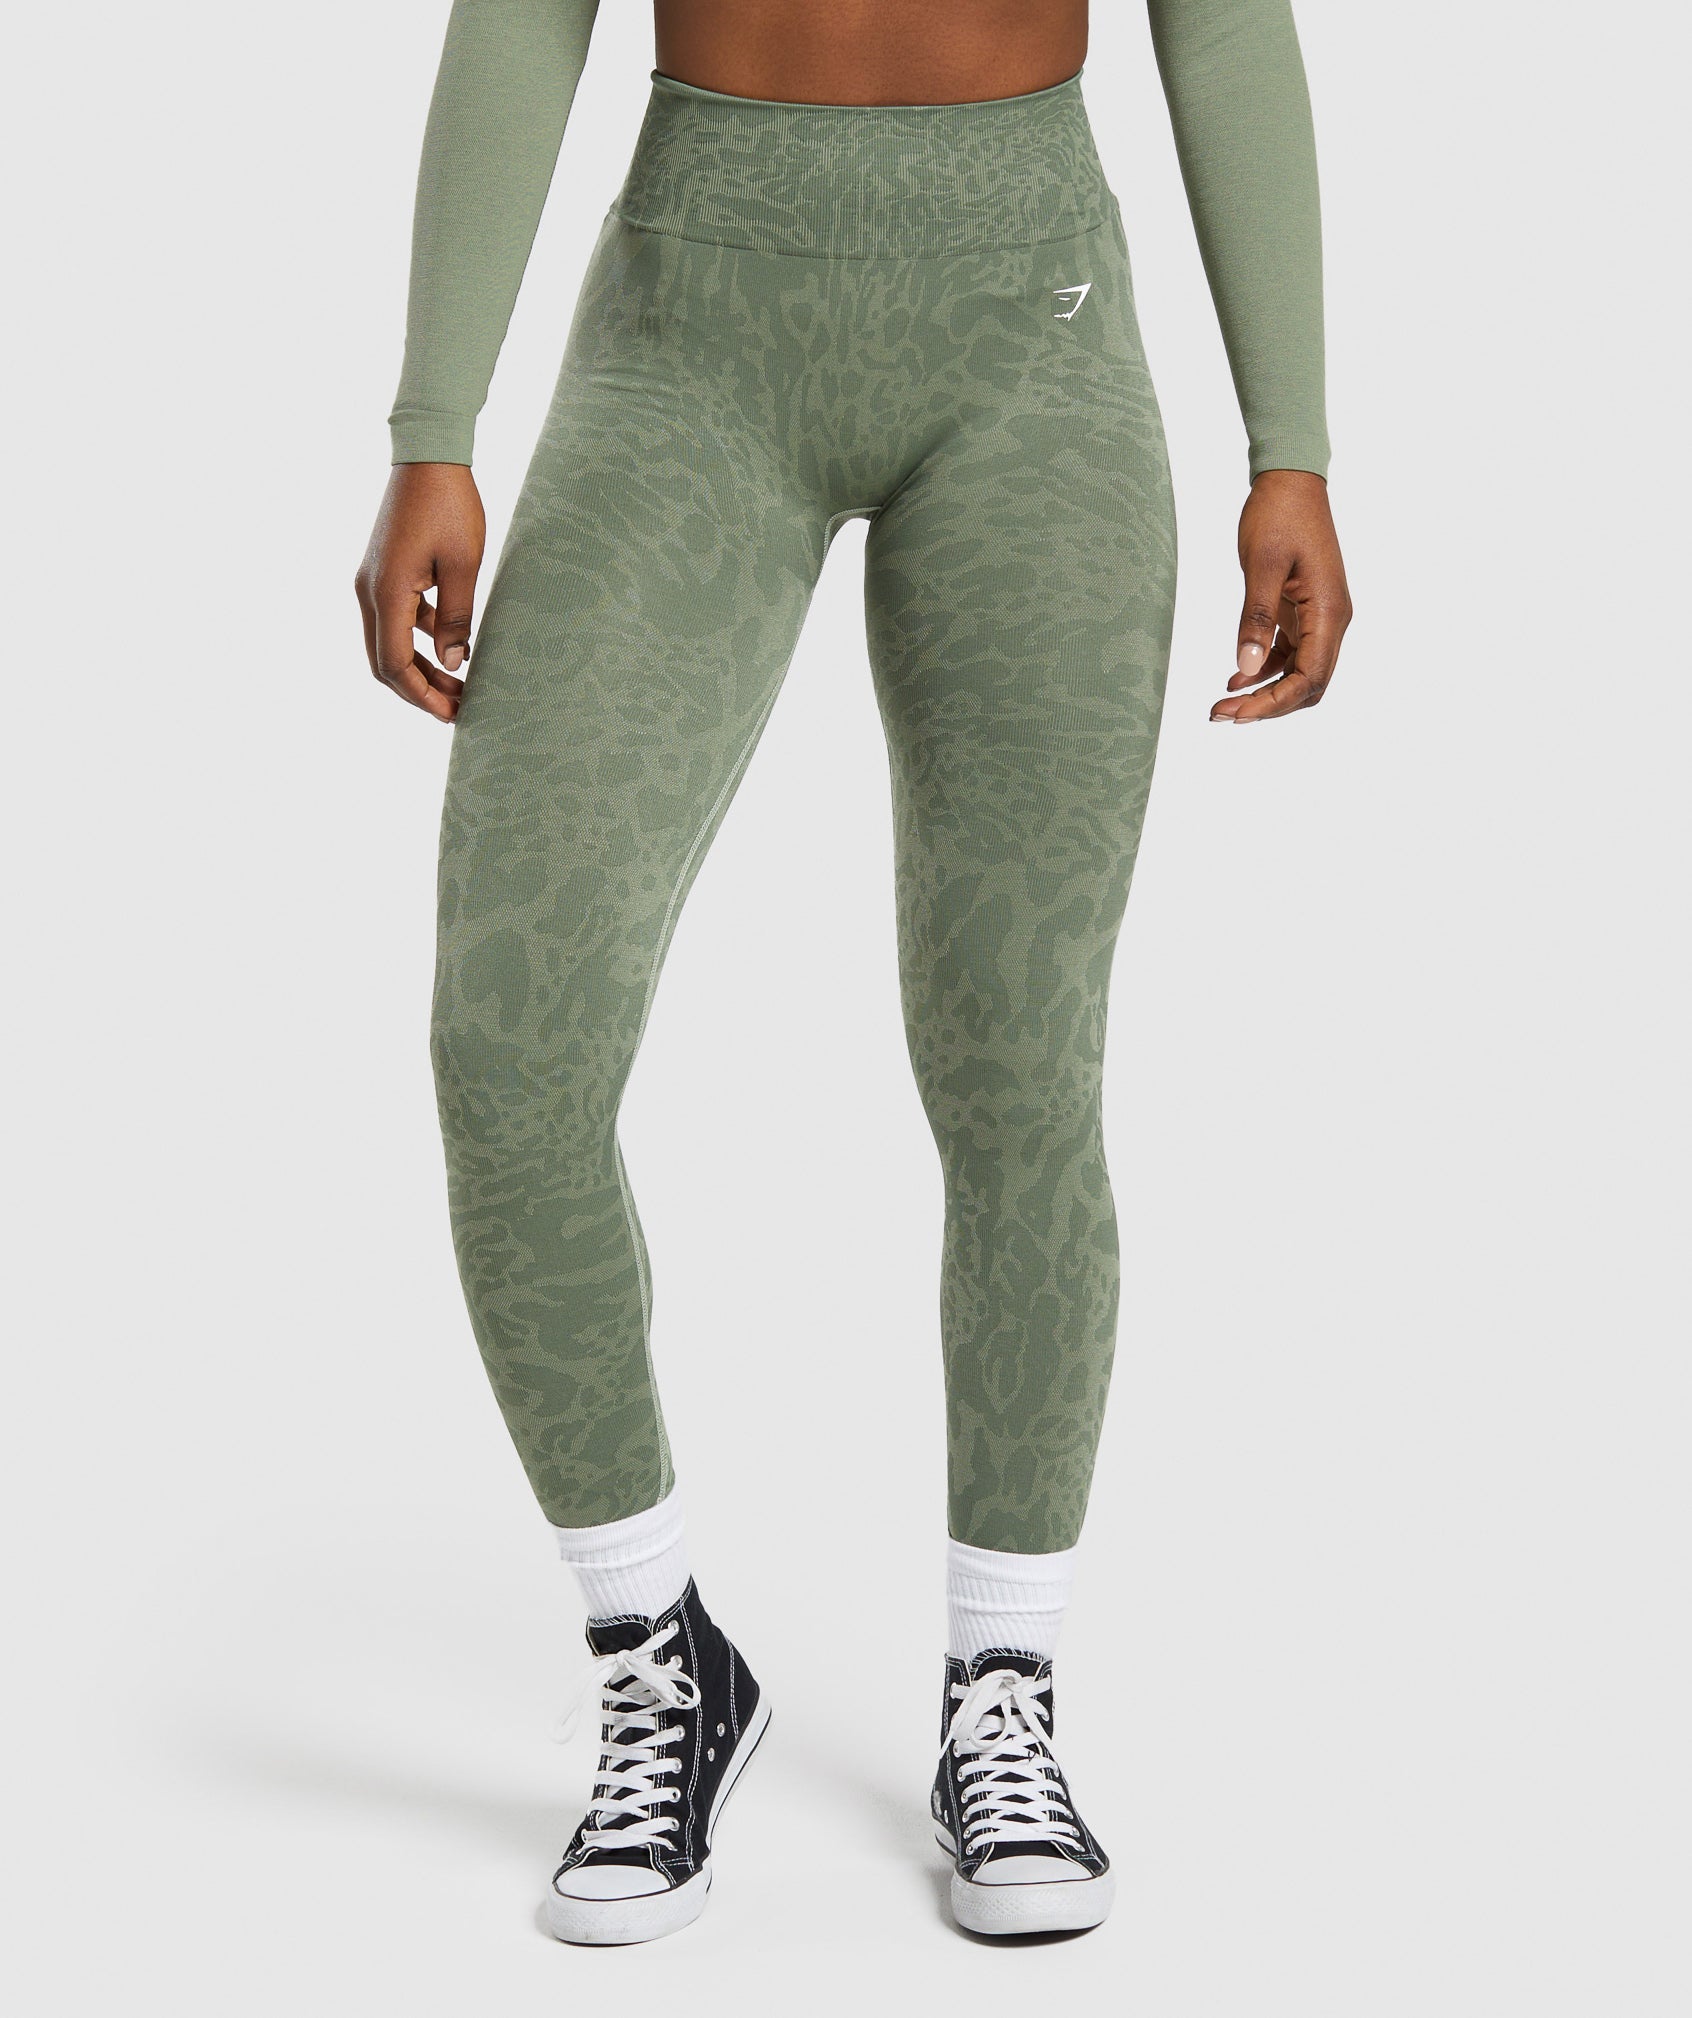 Gymshark Adapt Camo Seamless Leggings Black Size L - $35 (46% Off Retail) -  From Maggie